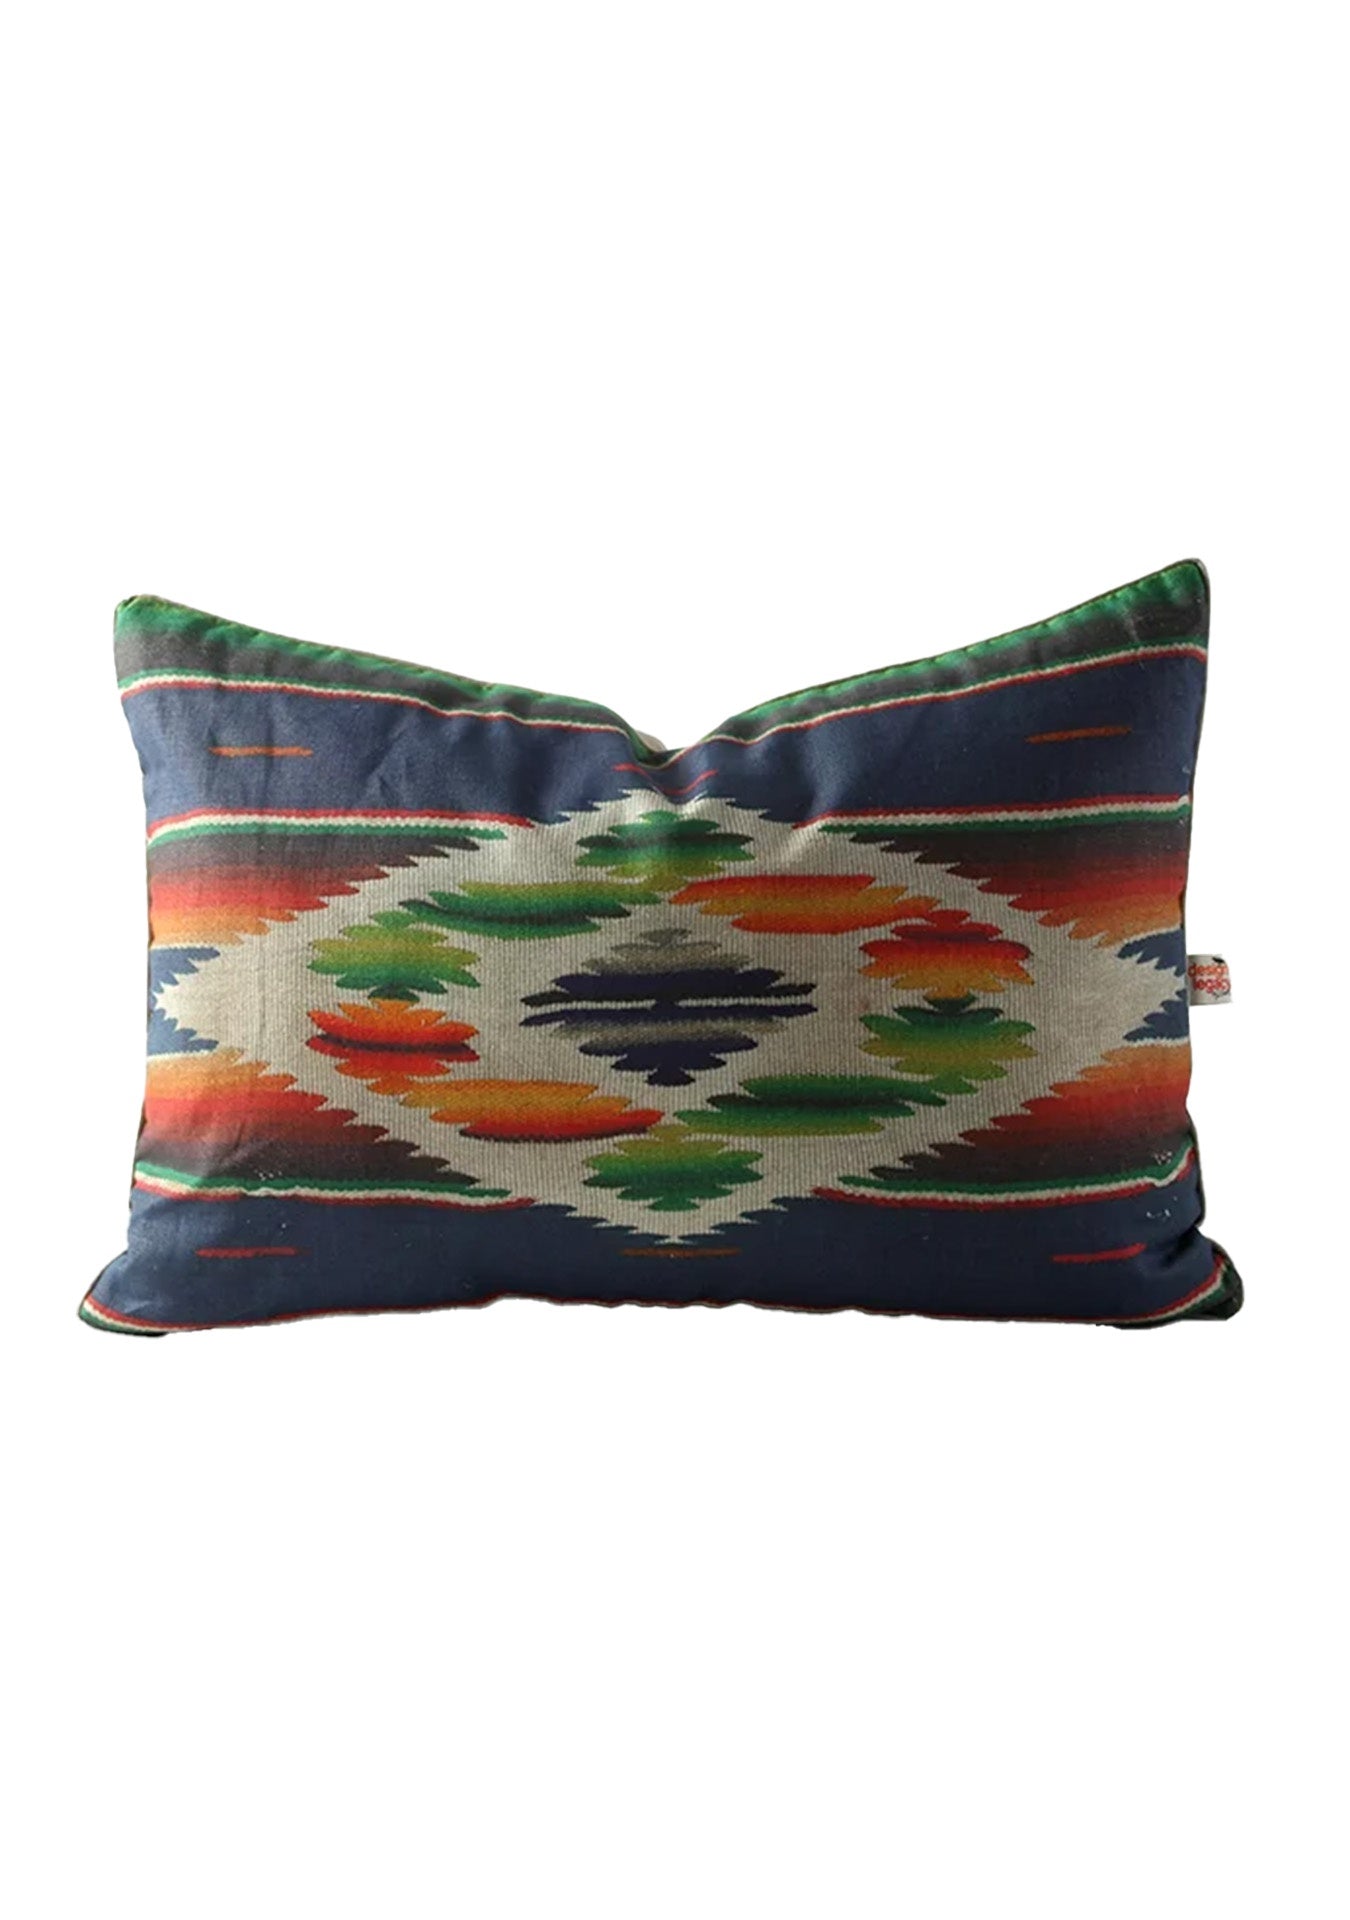 Colorful Southwestern Stripe with Diamond 17"x24" decorative pillow featuring vibrant geometric patterns in red, green, blue, and orange, with a bow-tie shape on a white background by Design Legacy.